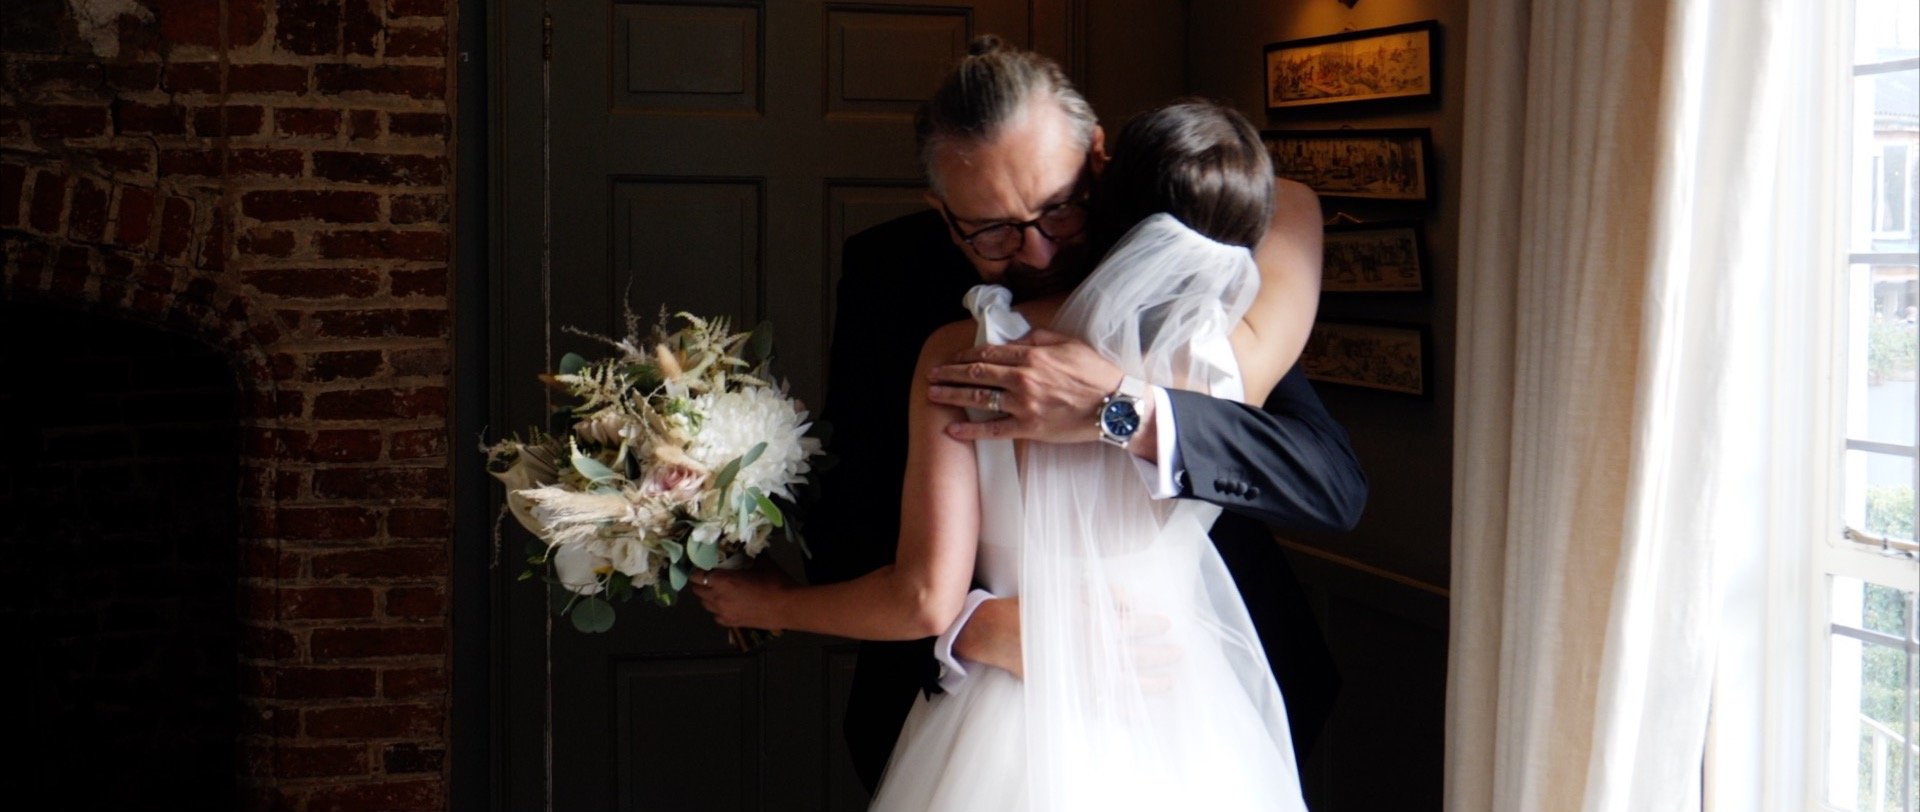 Houchins wedding venue video father seeing his daughter the bride.jpg